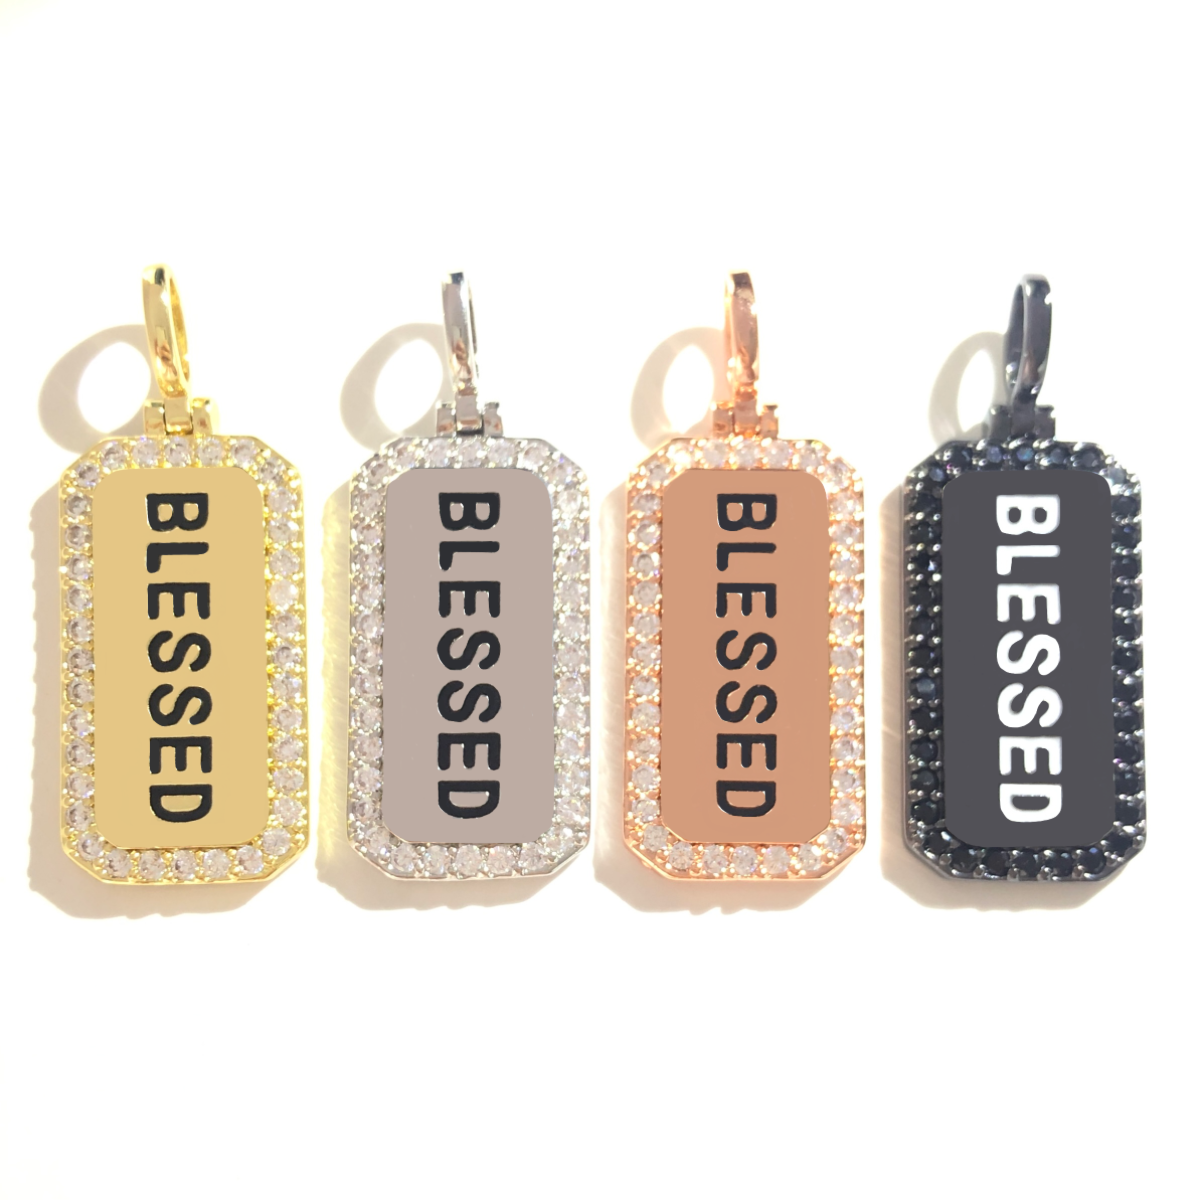 10pcs/lot 38*15mm CZ Paved Blessed Word Tags Charms Pendants Mix Colors CZ Paved Charms Christian Quotes New Charms Arrivals Word Tags Charms Beads Beyond